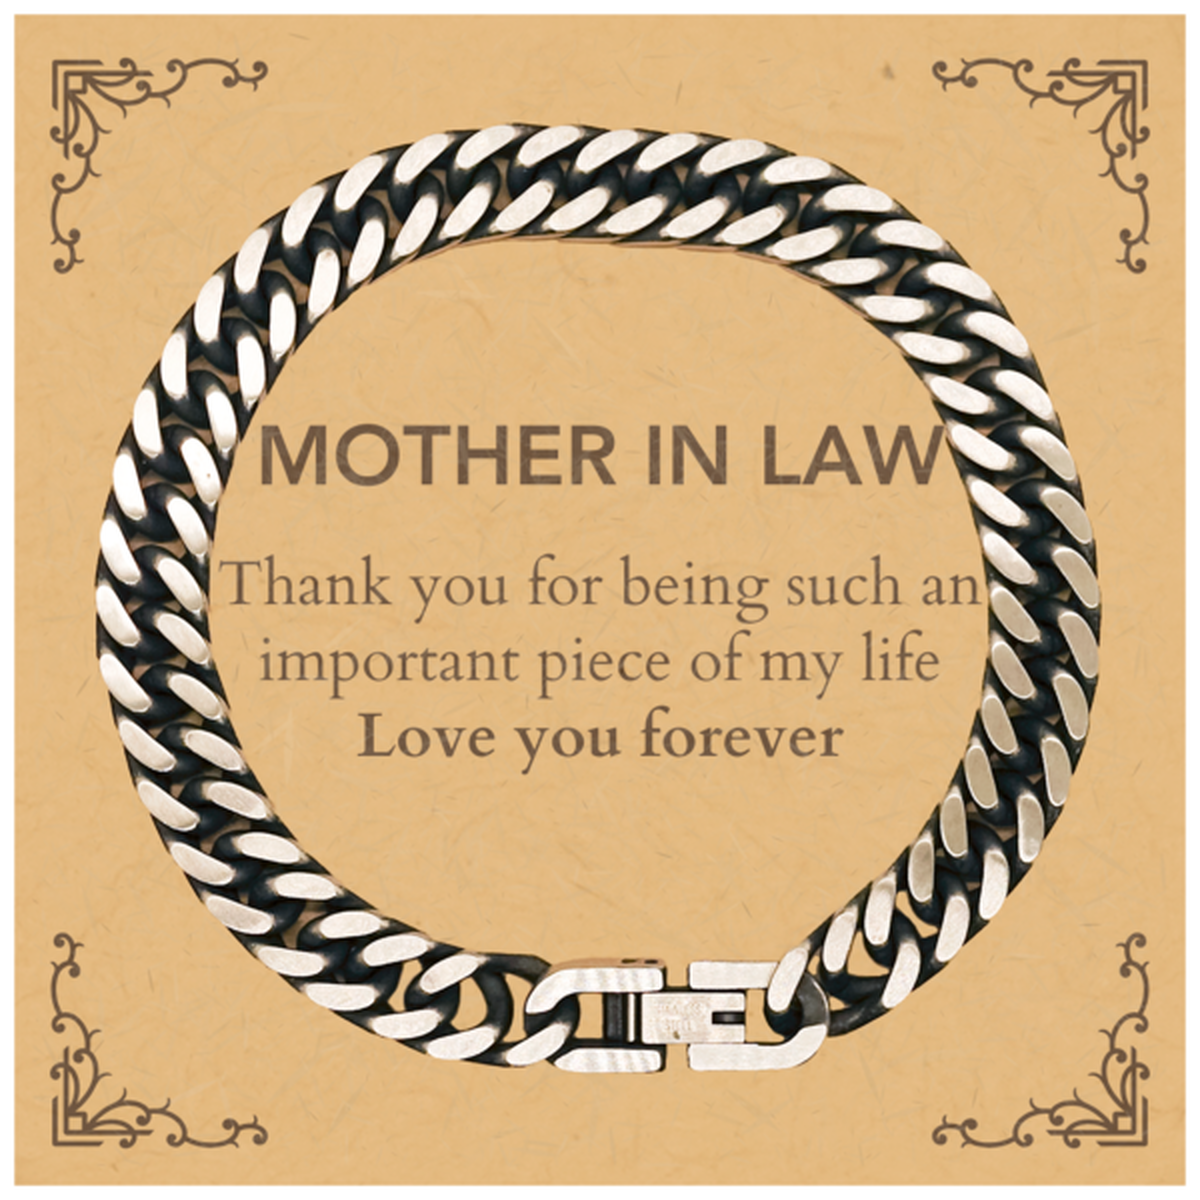 Appropriate Mother In Law Cuban Link Chain Bracelet Epic Birthday Gifts for Mother In Law Thank you for being such an important piece of my life Mother In Law Christmas Mothers Fathers Day